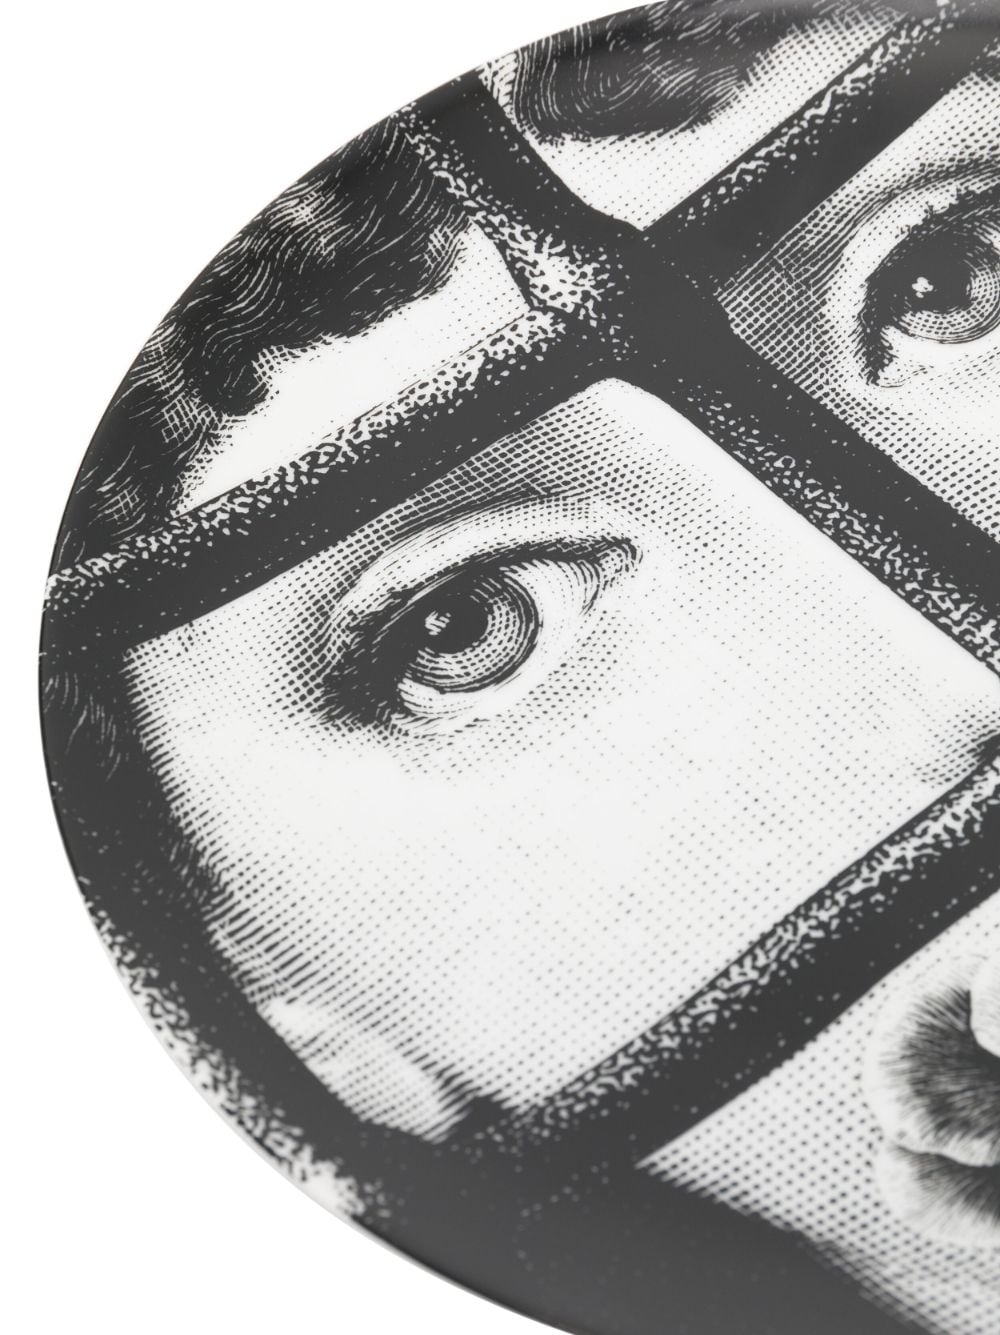 Shop Fornasetti Graphic-print Plate In White